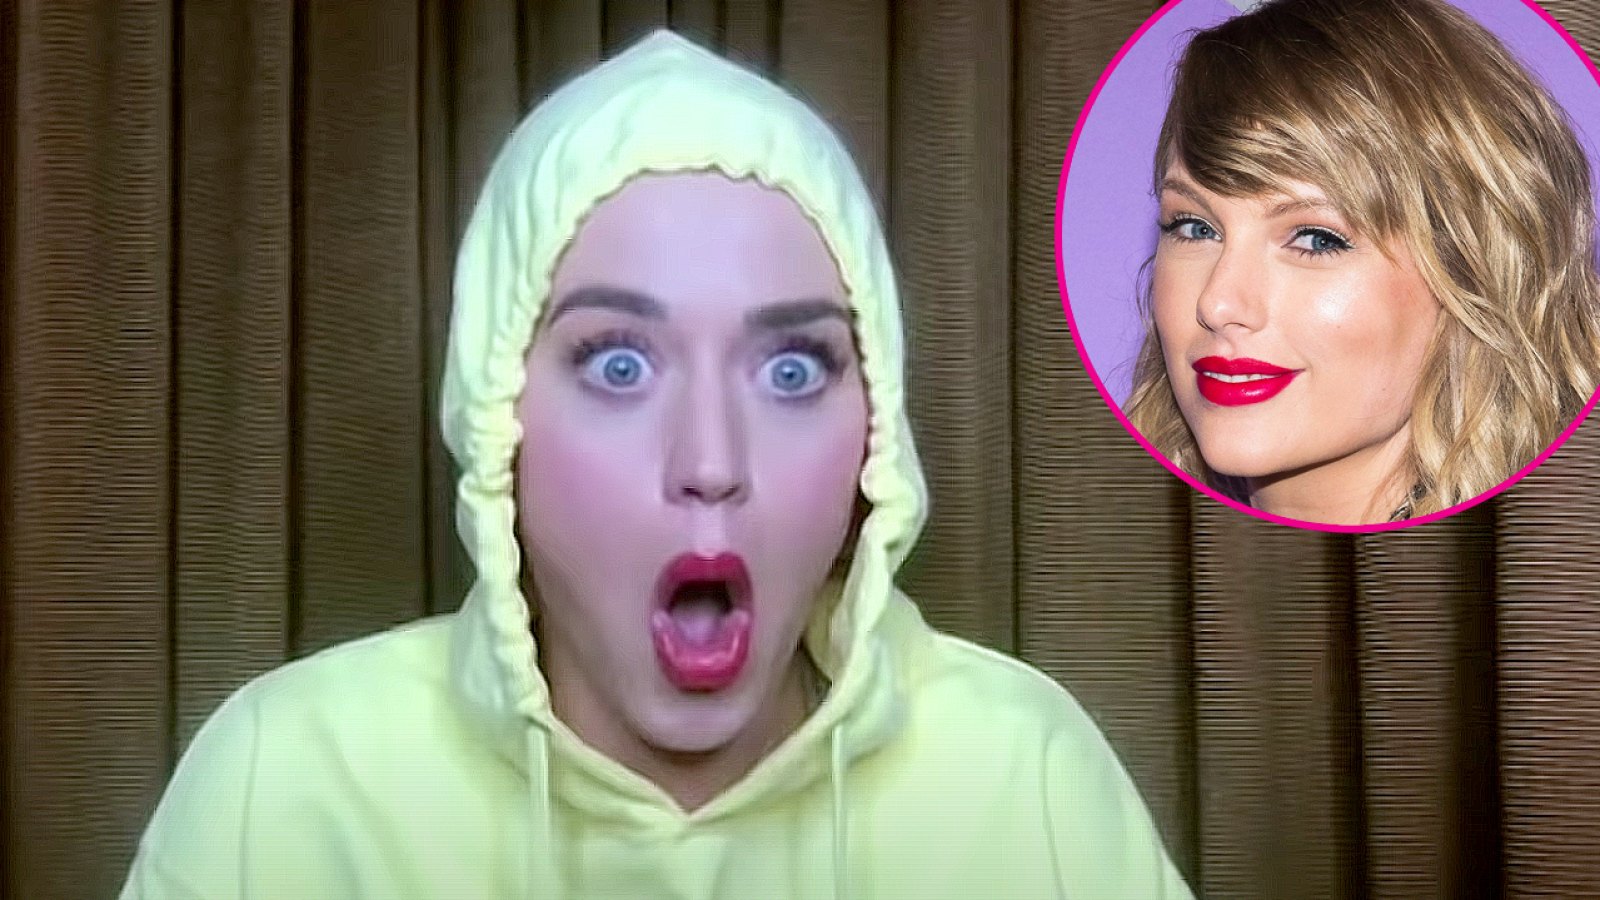 Katy Perry Reacts to Fan Theory That She and Taylor Swift Are Related